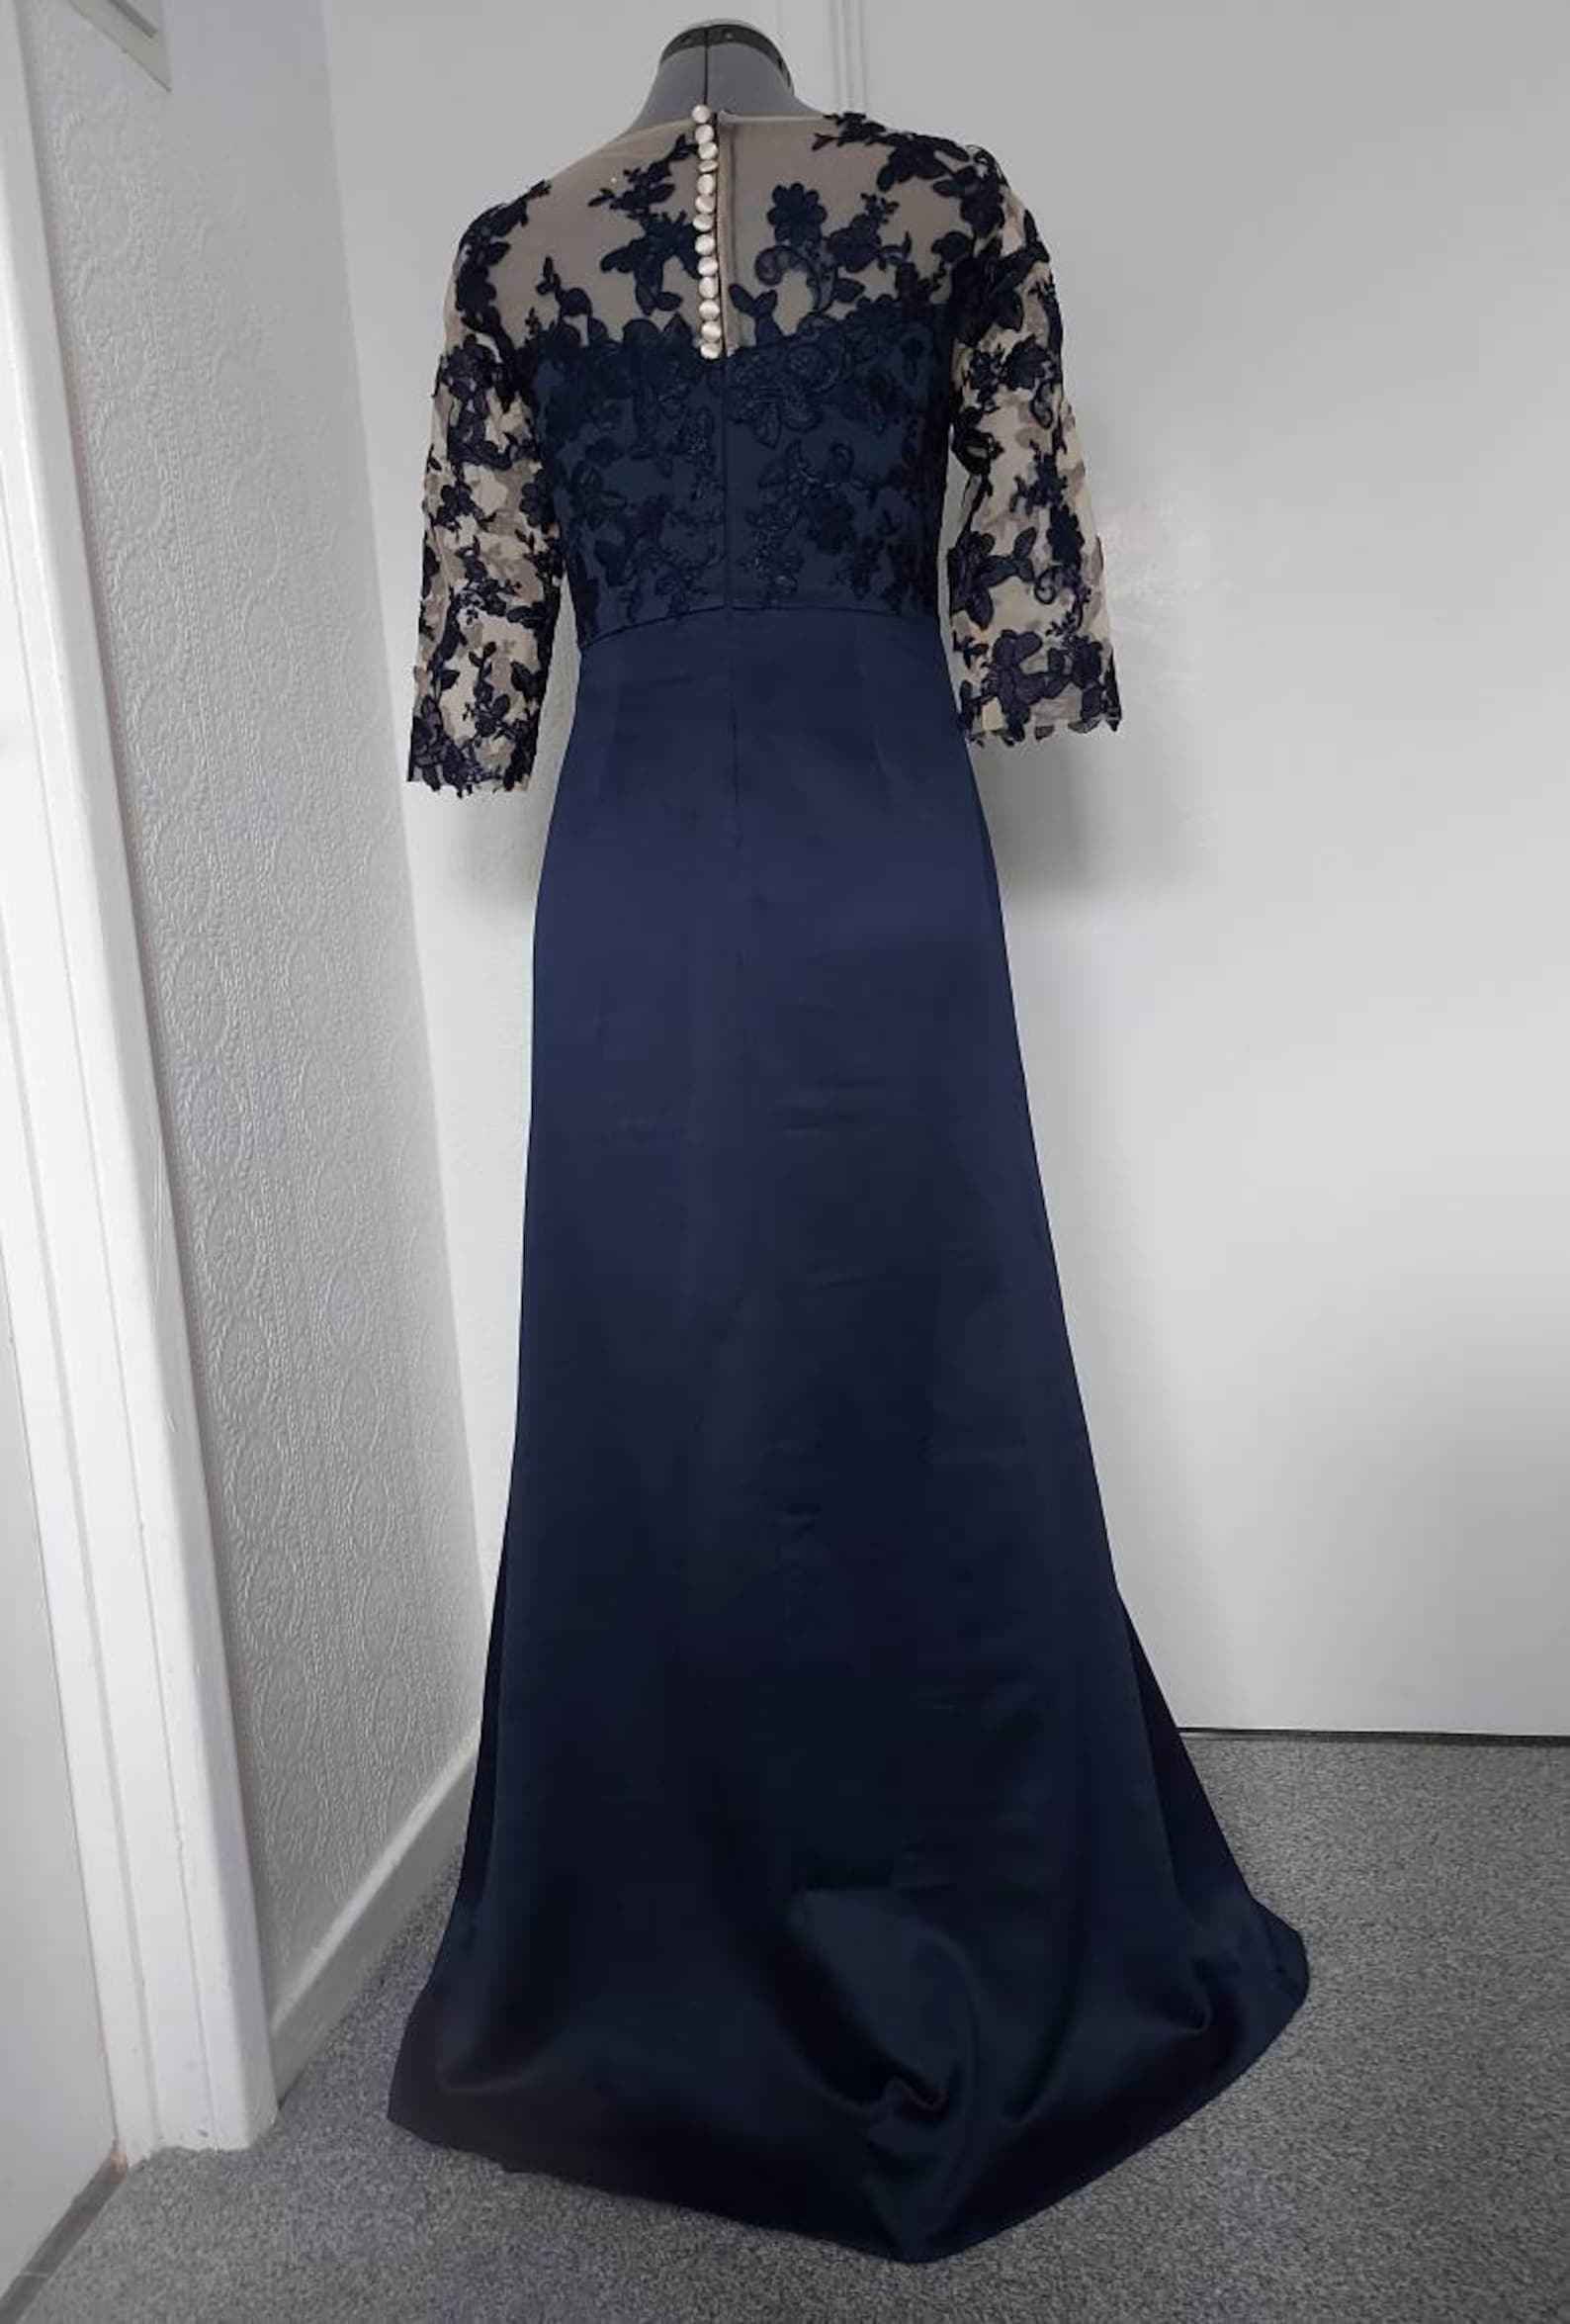 Handmade Navy Blue Lace Decorated Mother of the Bride Groom - Etsy